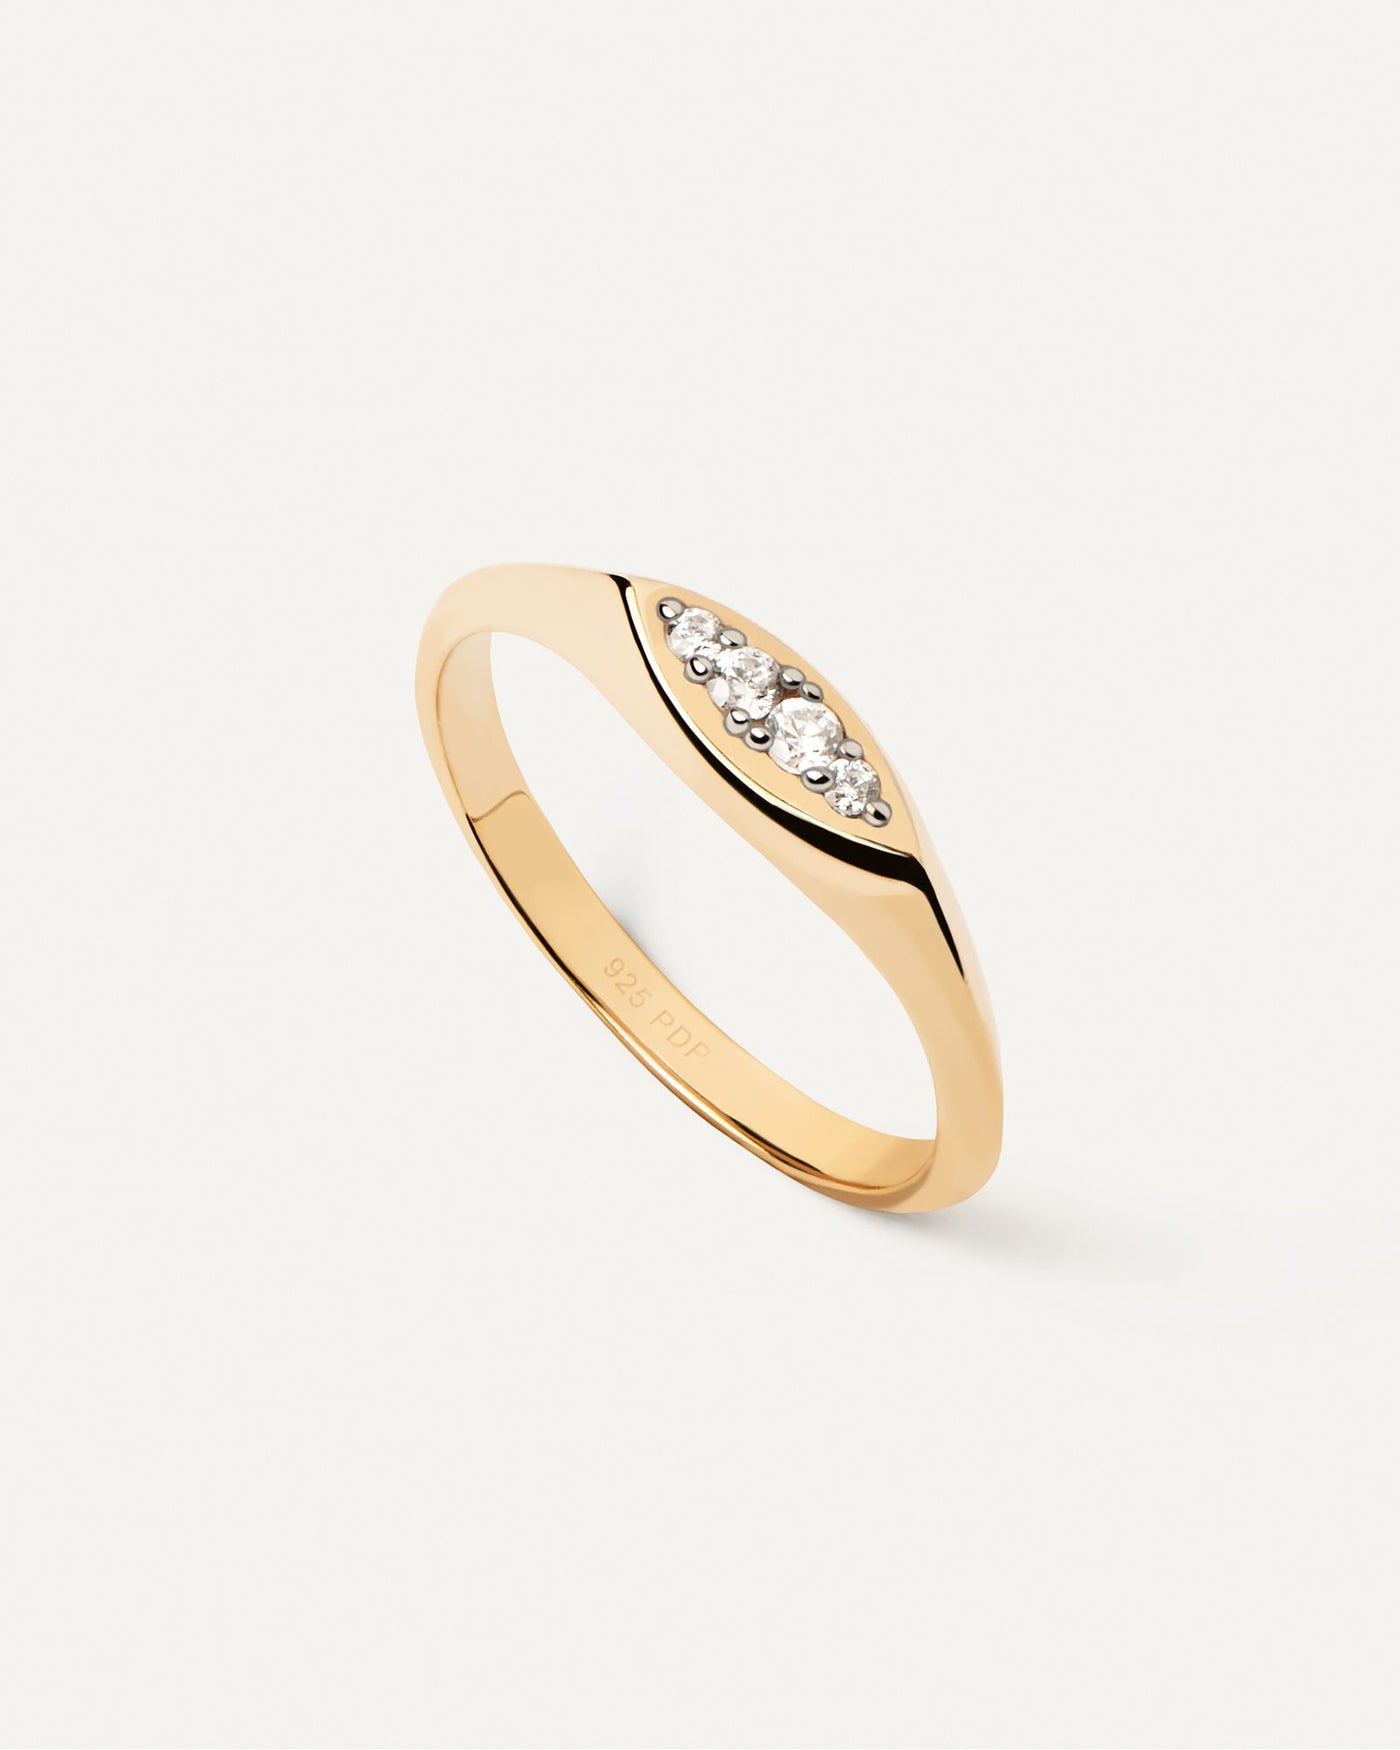 2024 Selection | Gala Stamp Ring. Gold-plated slim signet ring set with eye shape white zirconia multi-stone cluster . Get the latest arrival from PDPAOLA. Place your order safely and get this Best Seller. Free Shipping.